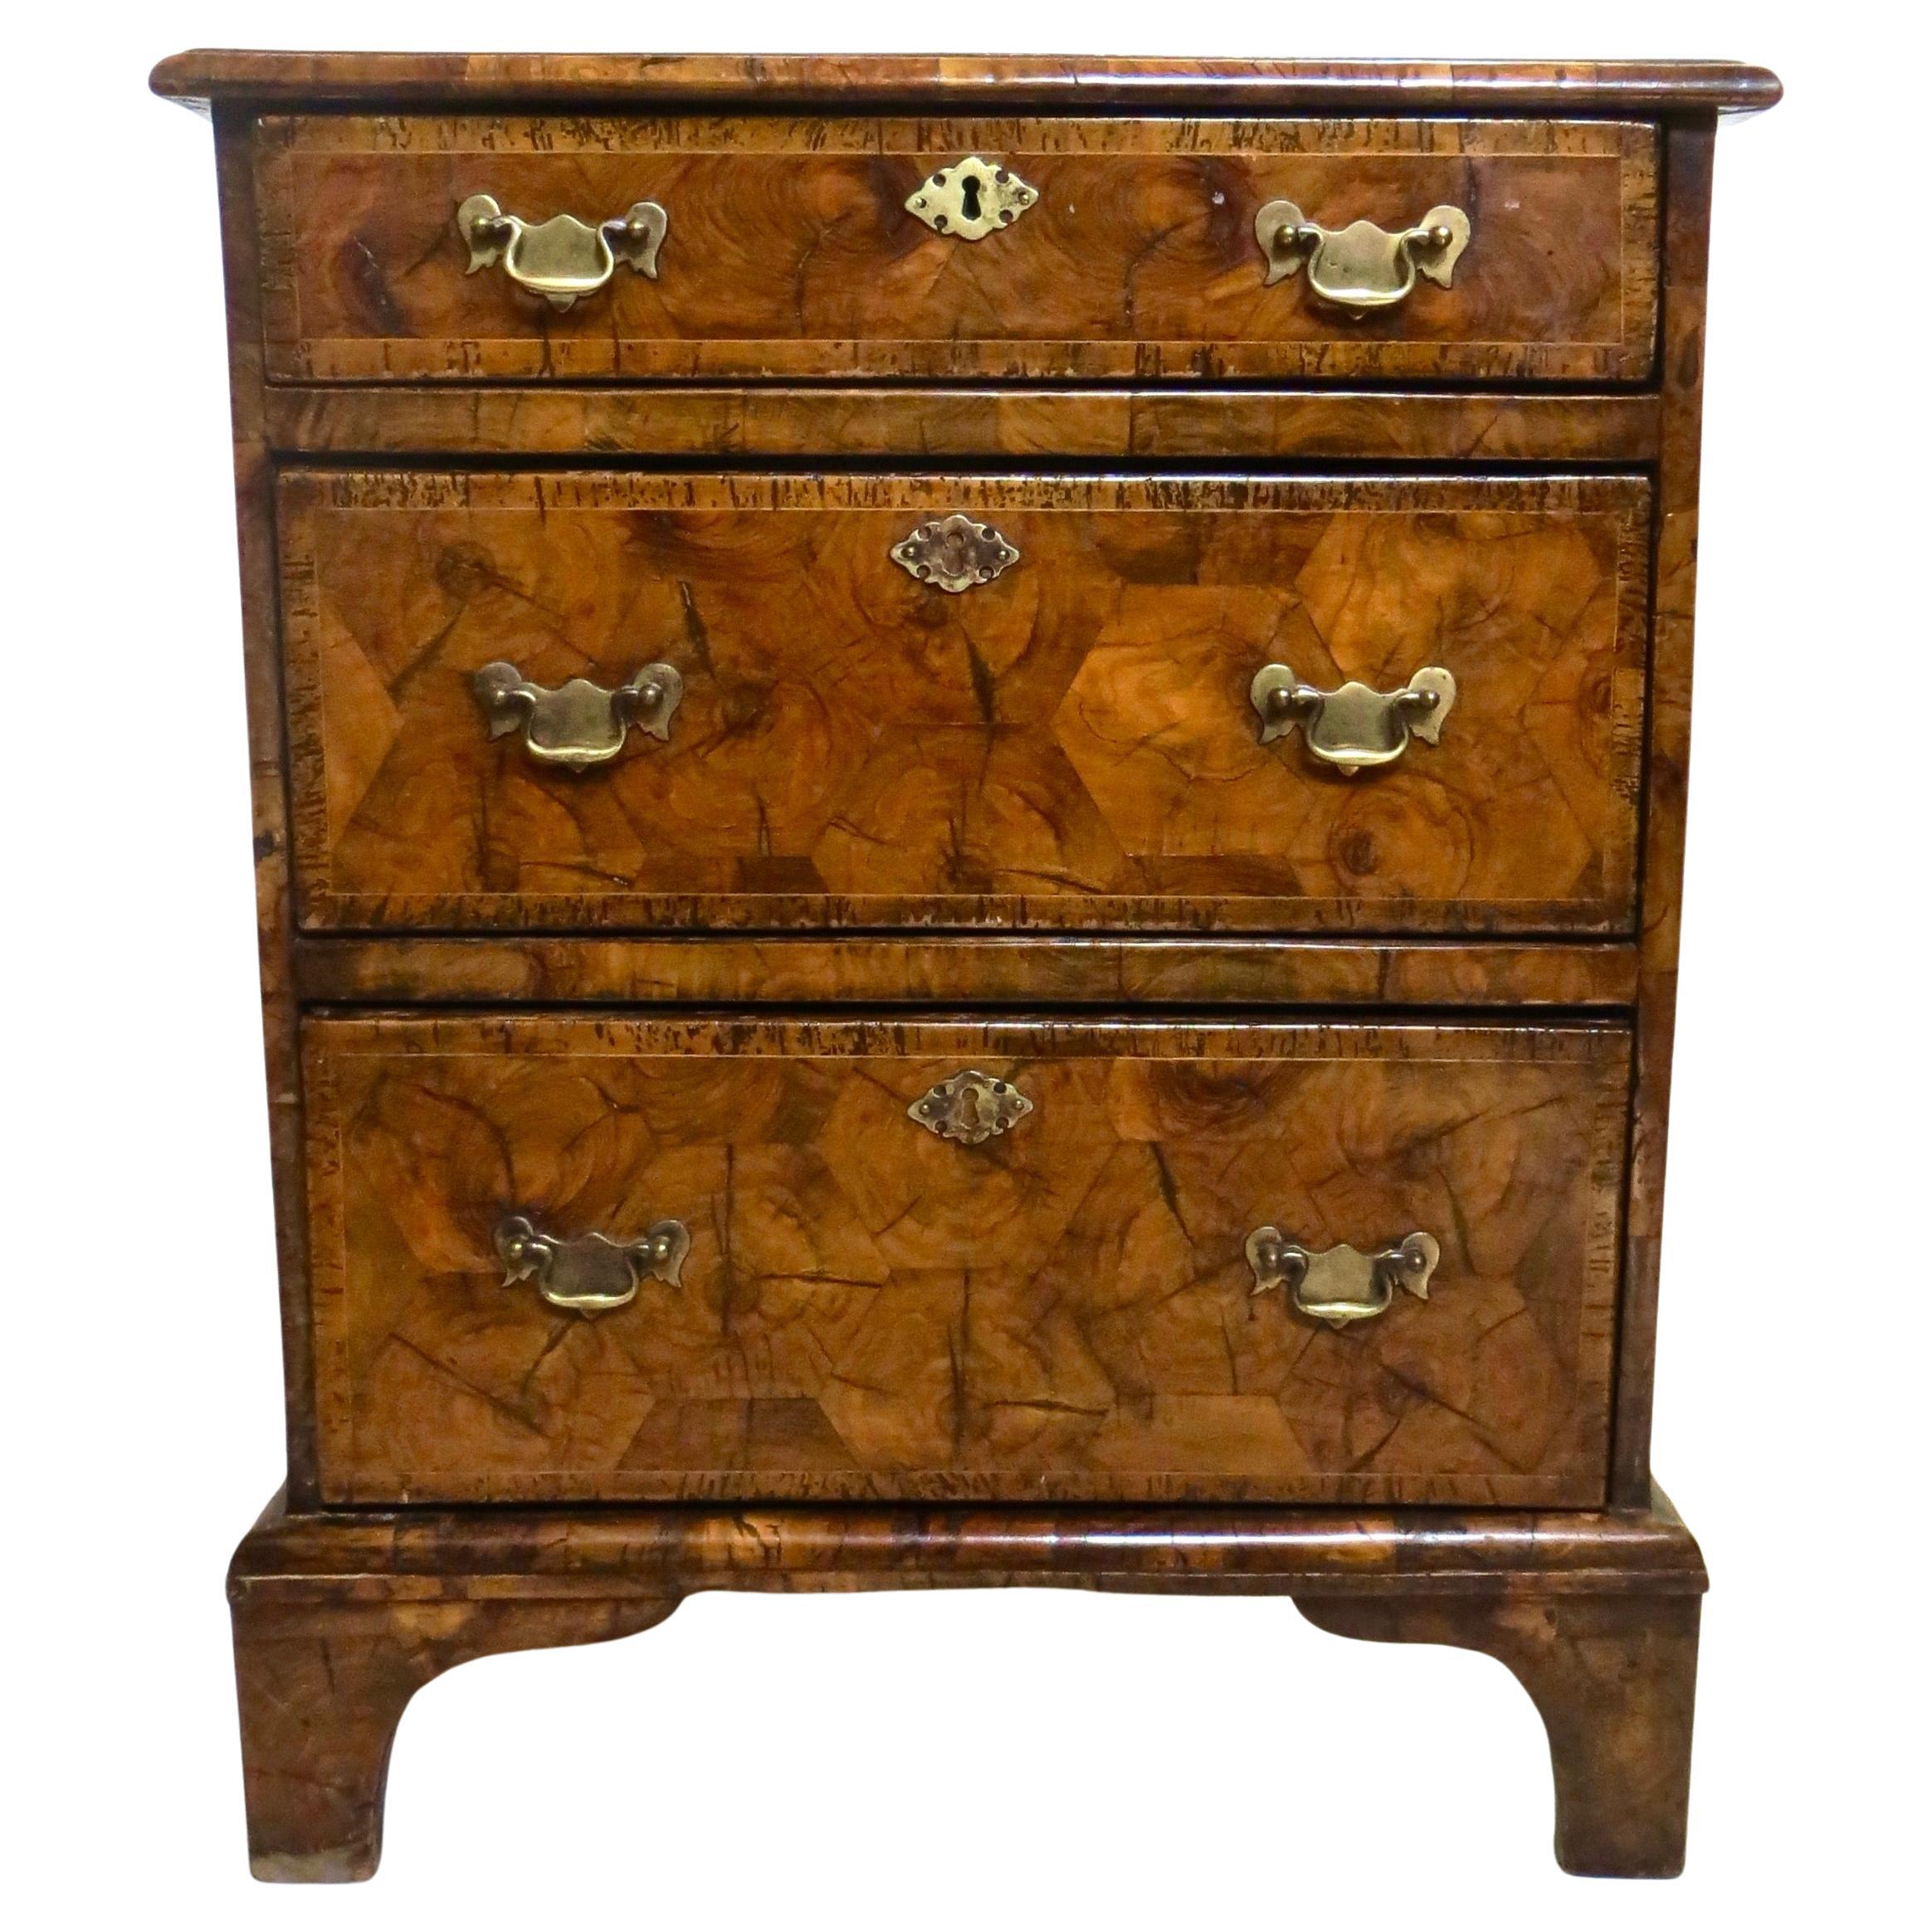 Early 18th century, Highly Figured Oyster Veneer '3' Drawer Chest